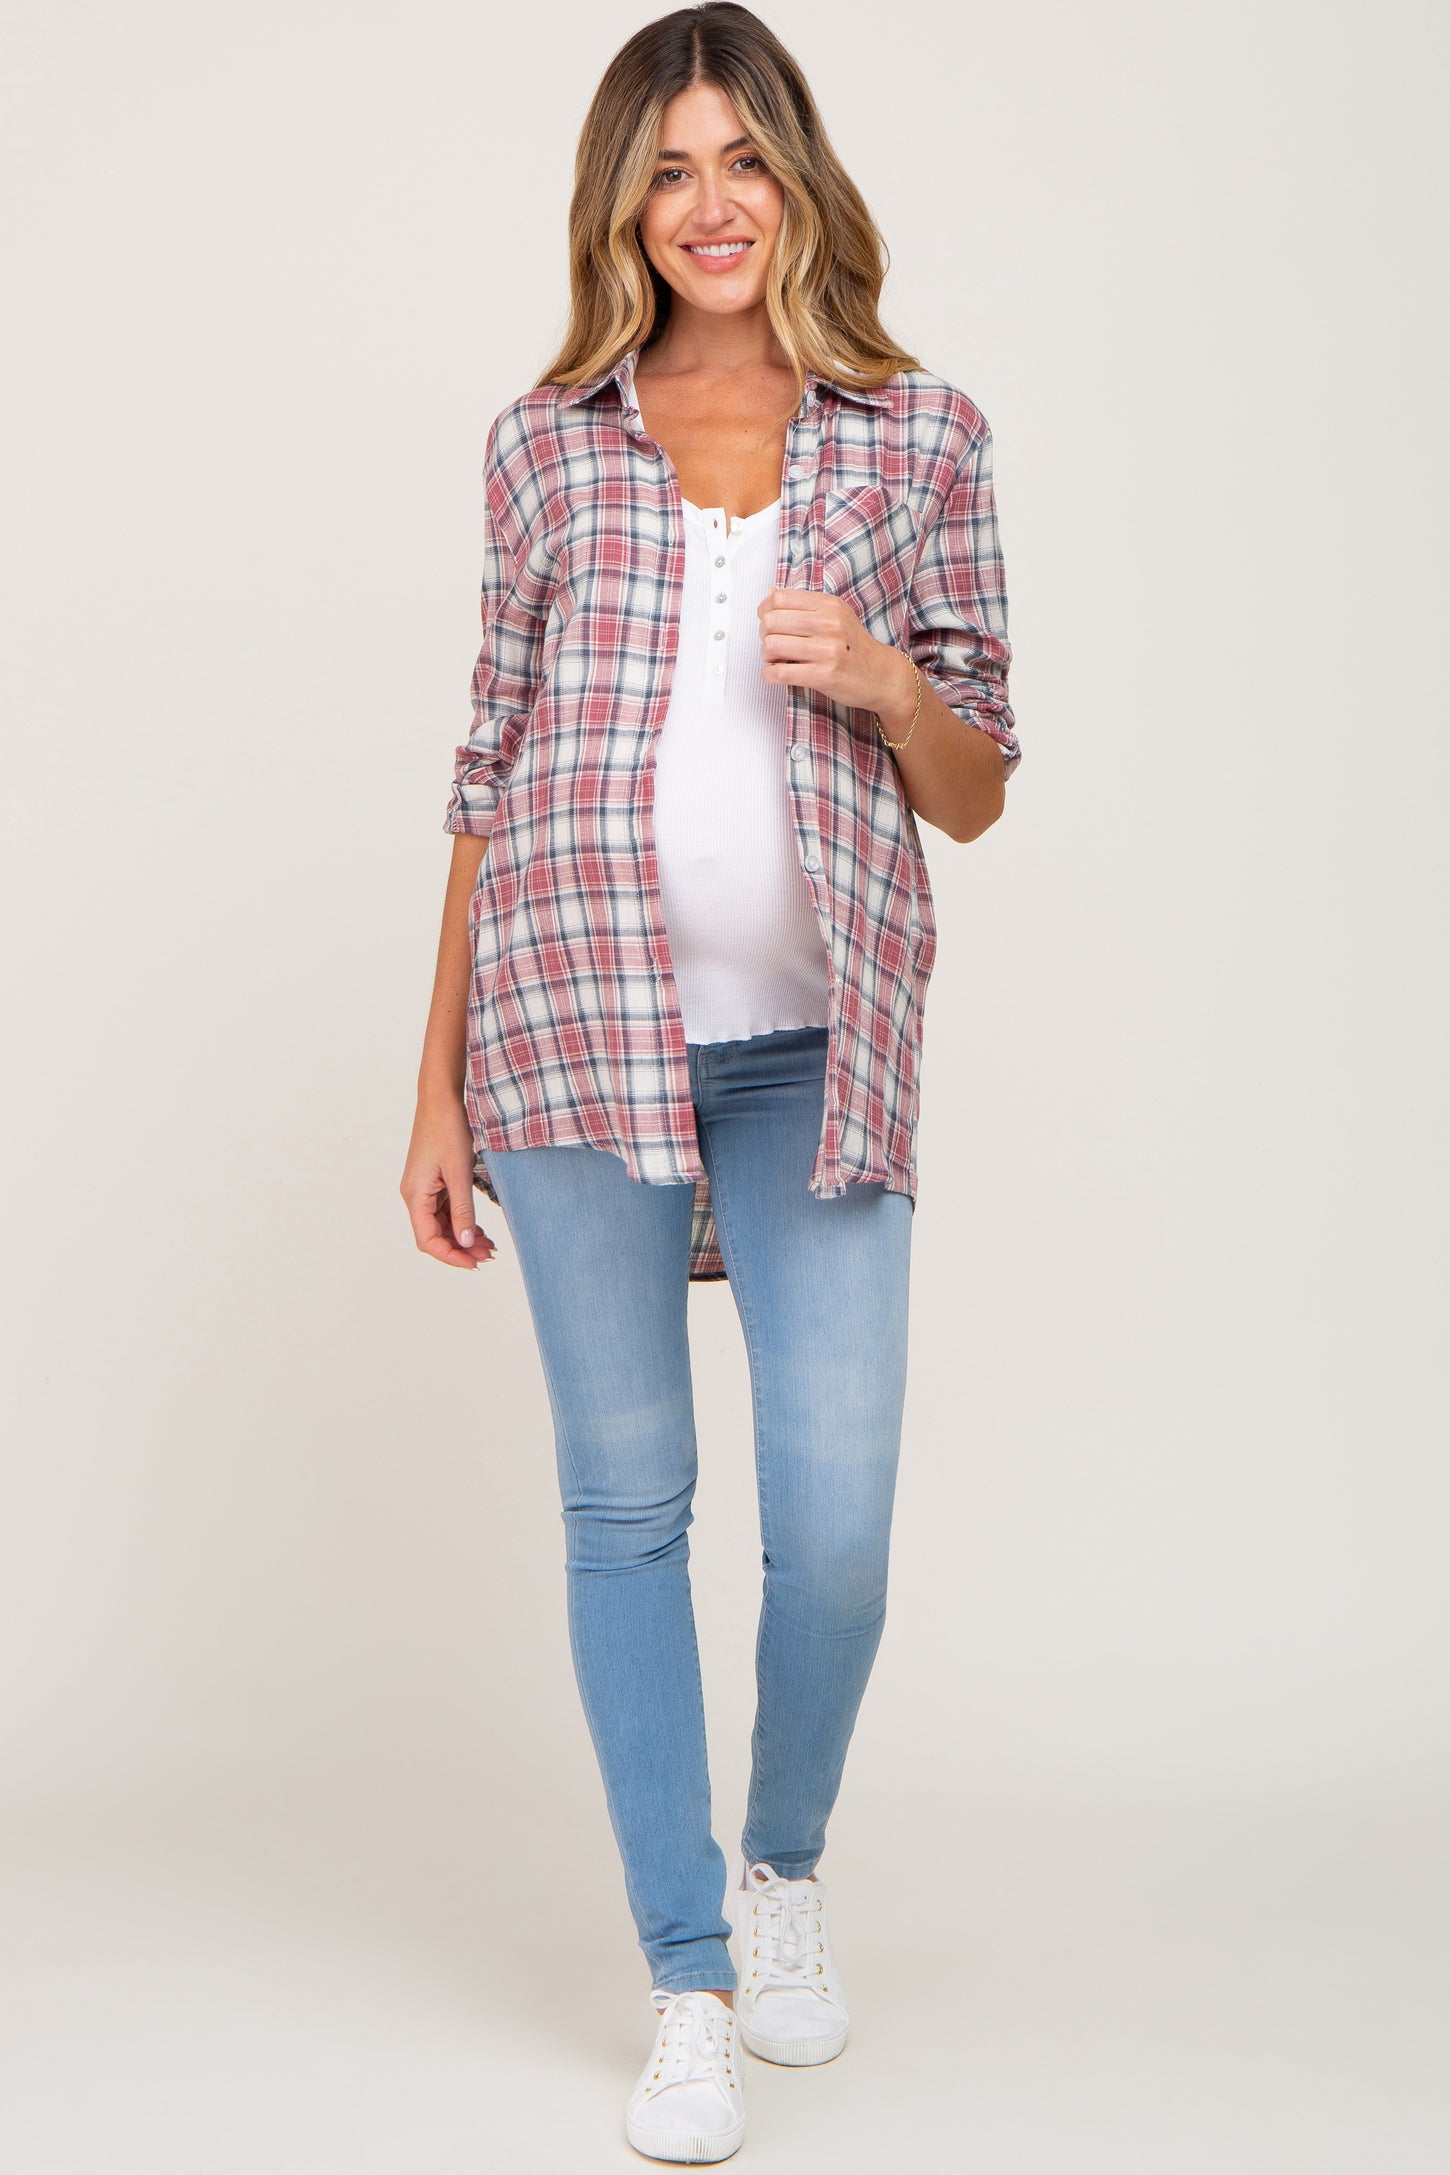 Red Plaid Rolled Cuff Flannel Maternity Top